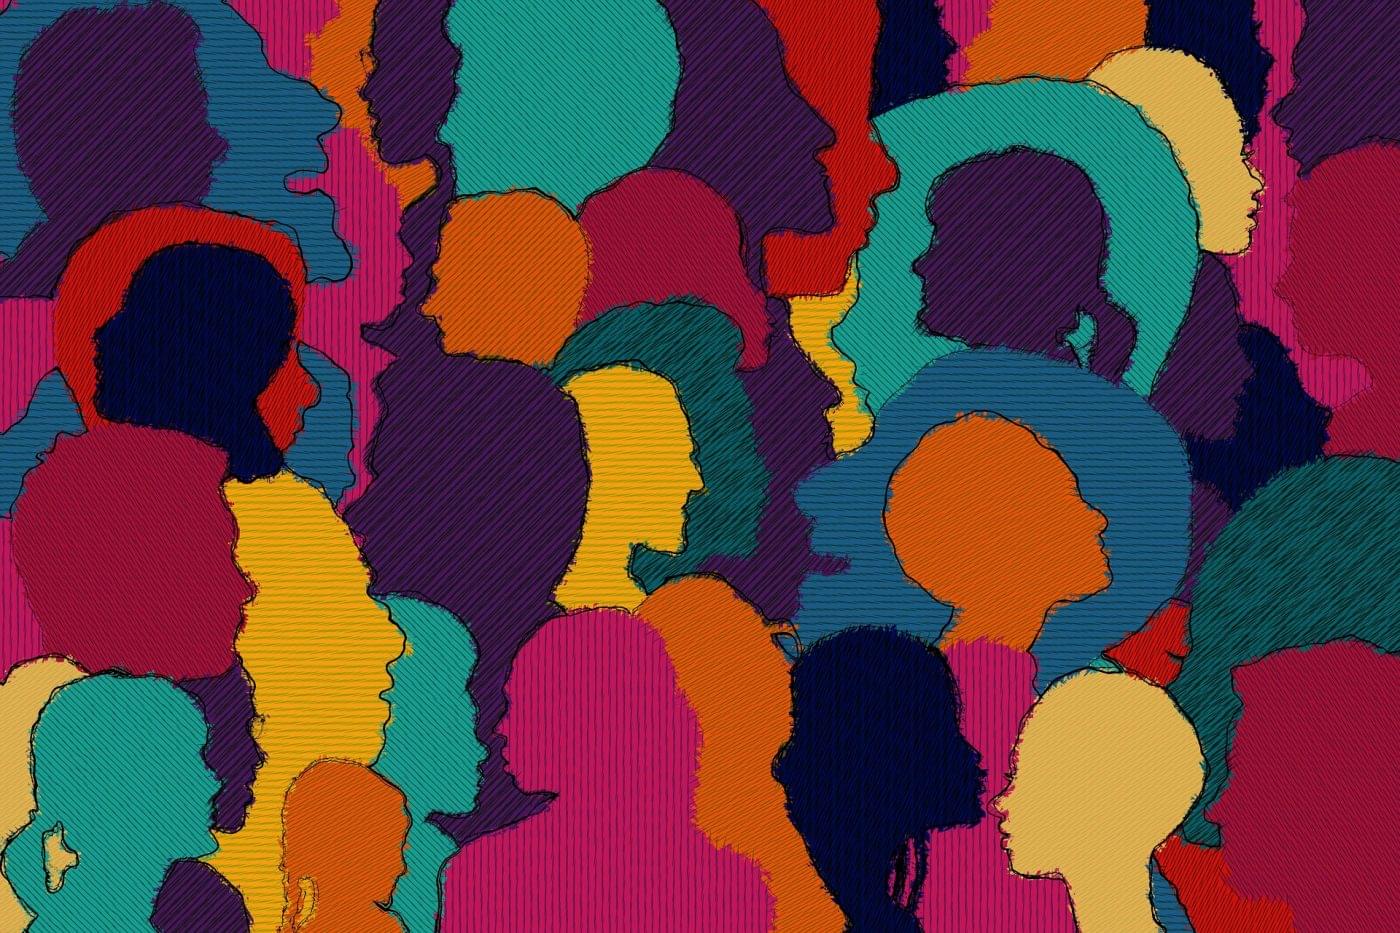 A collage of multi-colored people silhouettes